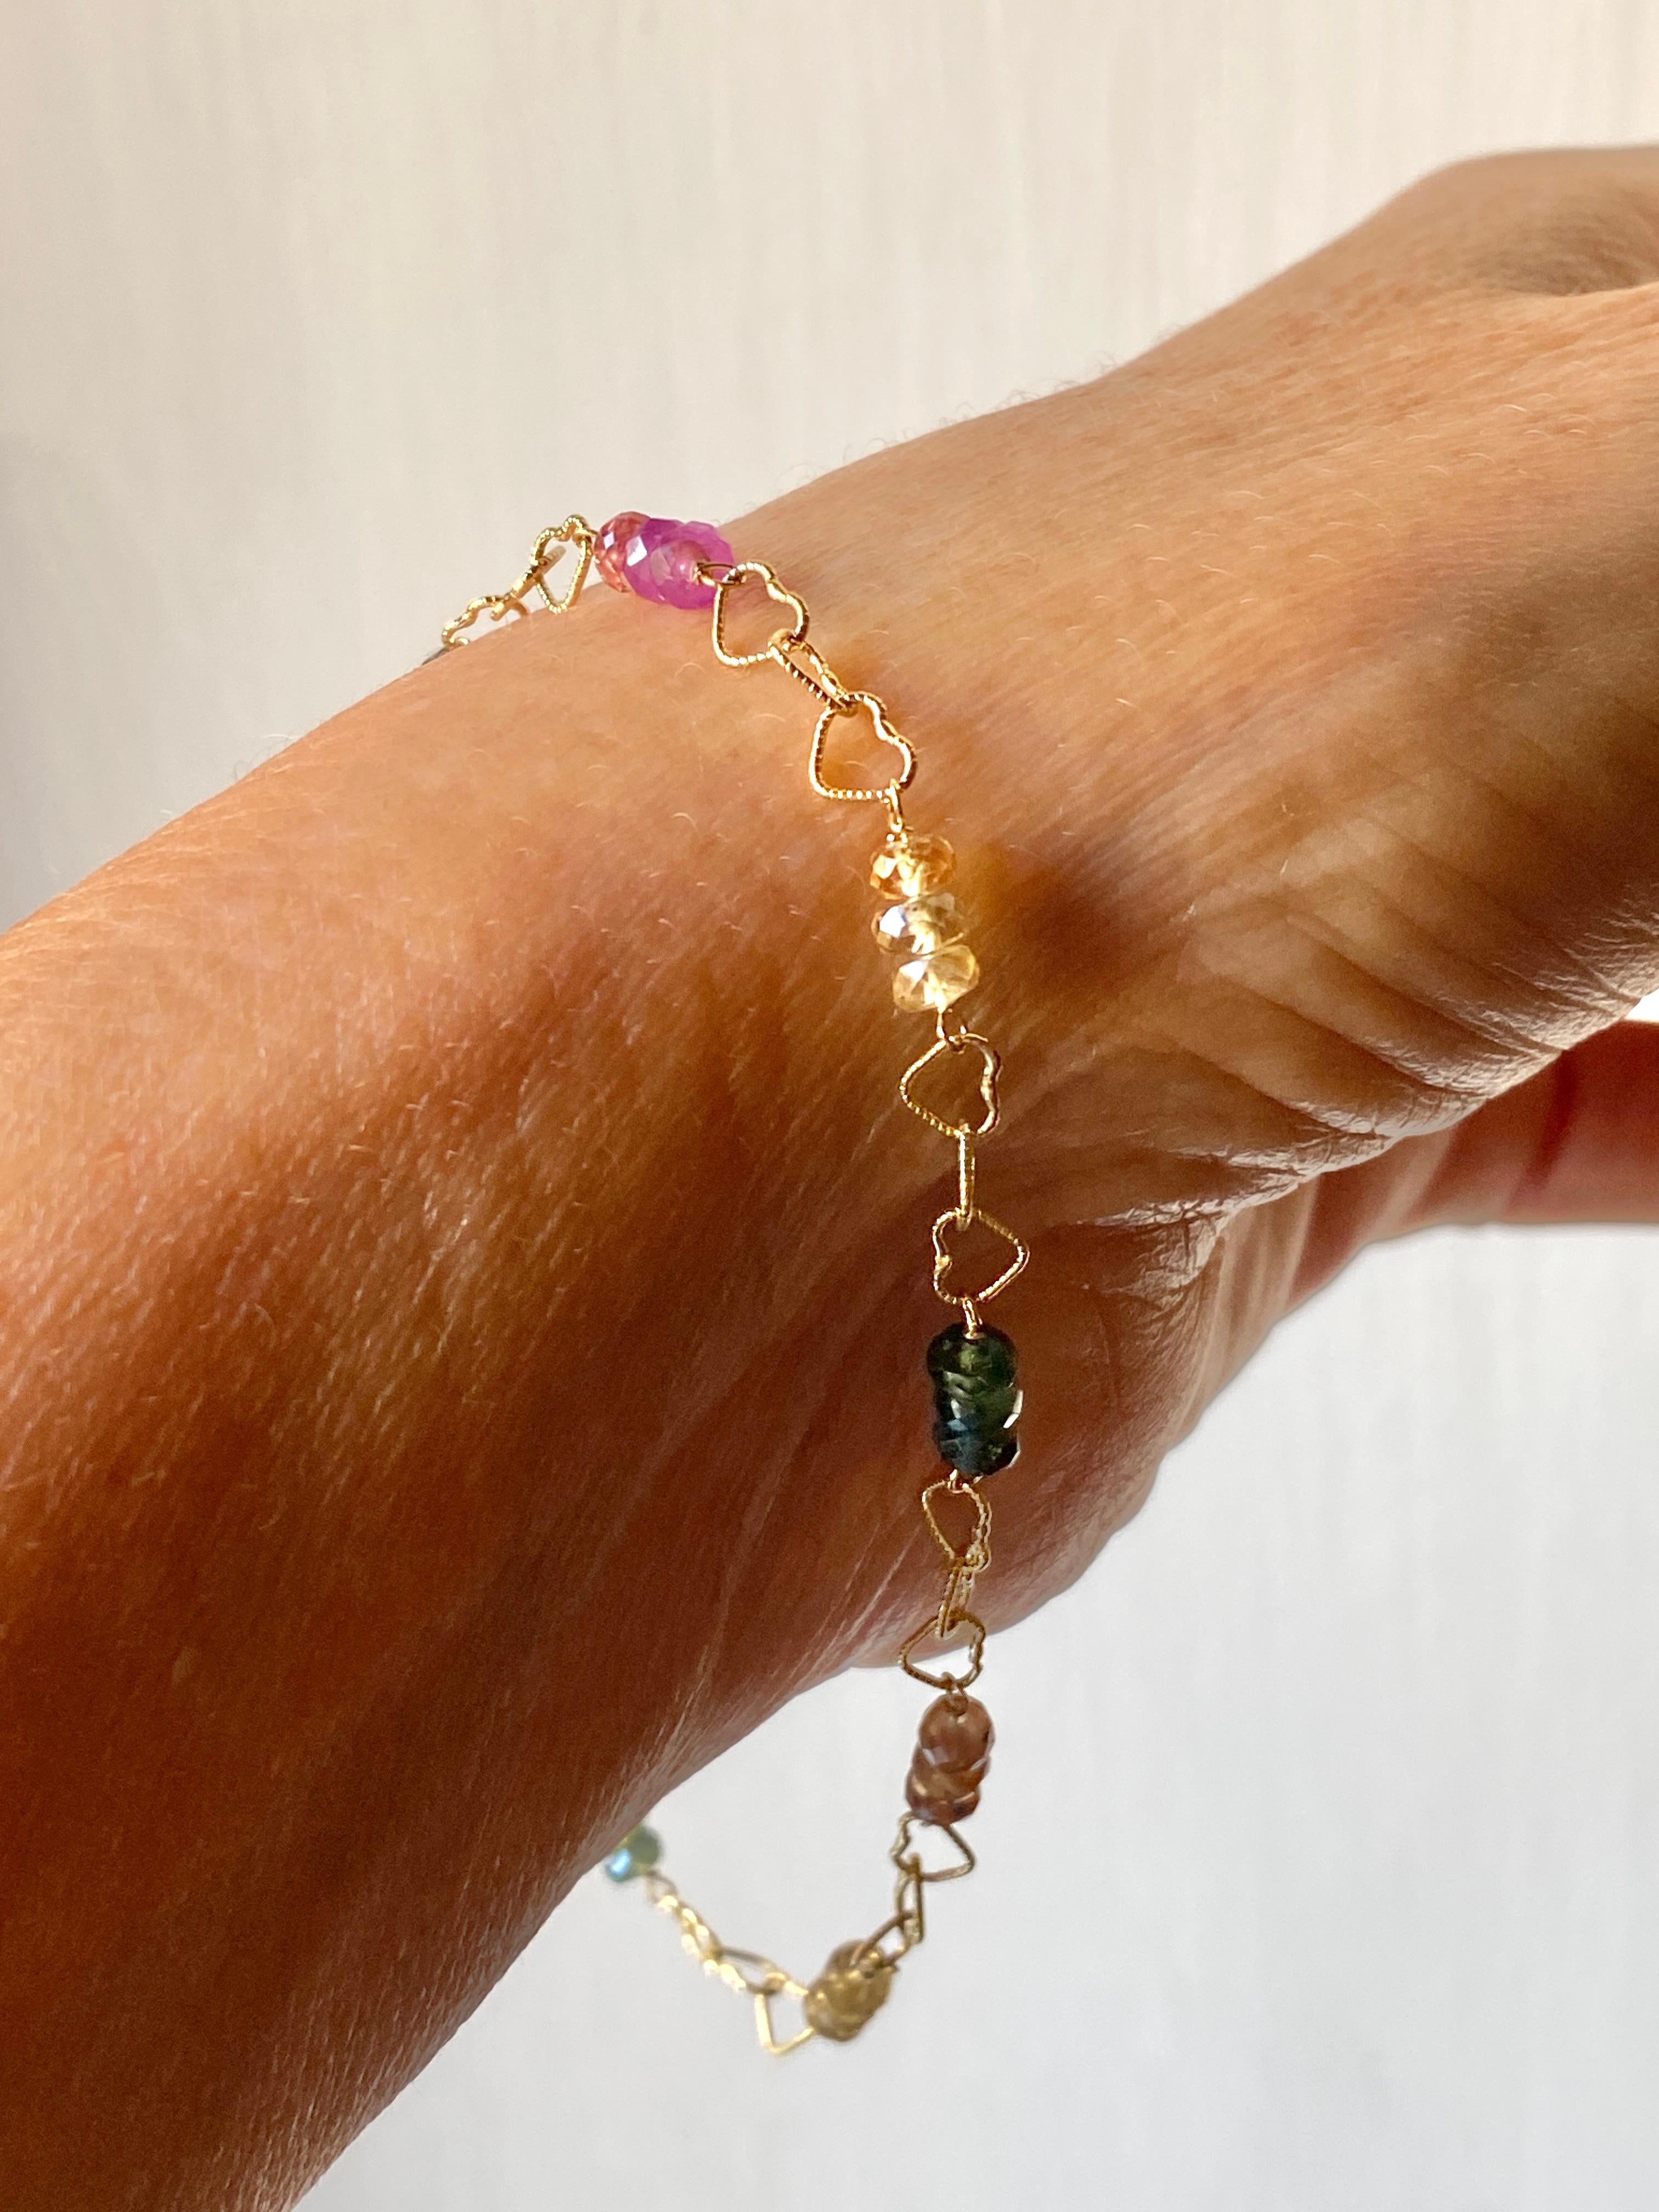 Rossella Ugolini Design Collection Exquisite 18K Yellow Gold Multicolor Sapphires Beads and Slightly Hammered Hearts Chain, Handcrafted in Italy. This enchanting bracelet features a colored array of Sapphires, forming a beautiful rainbow effect